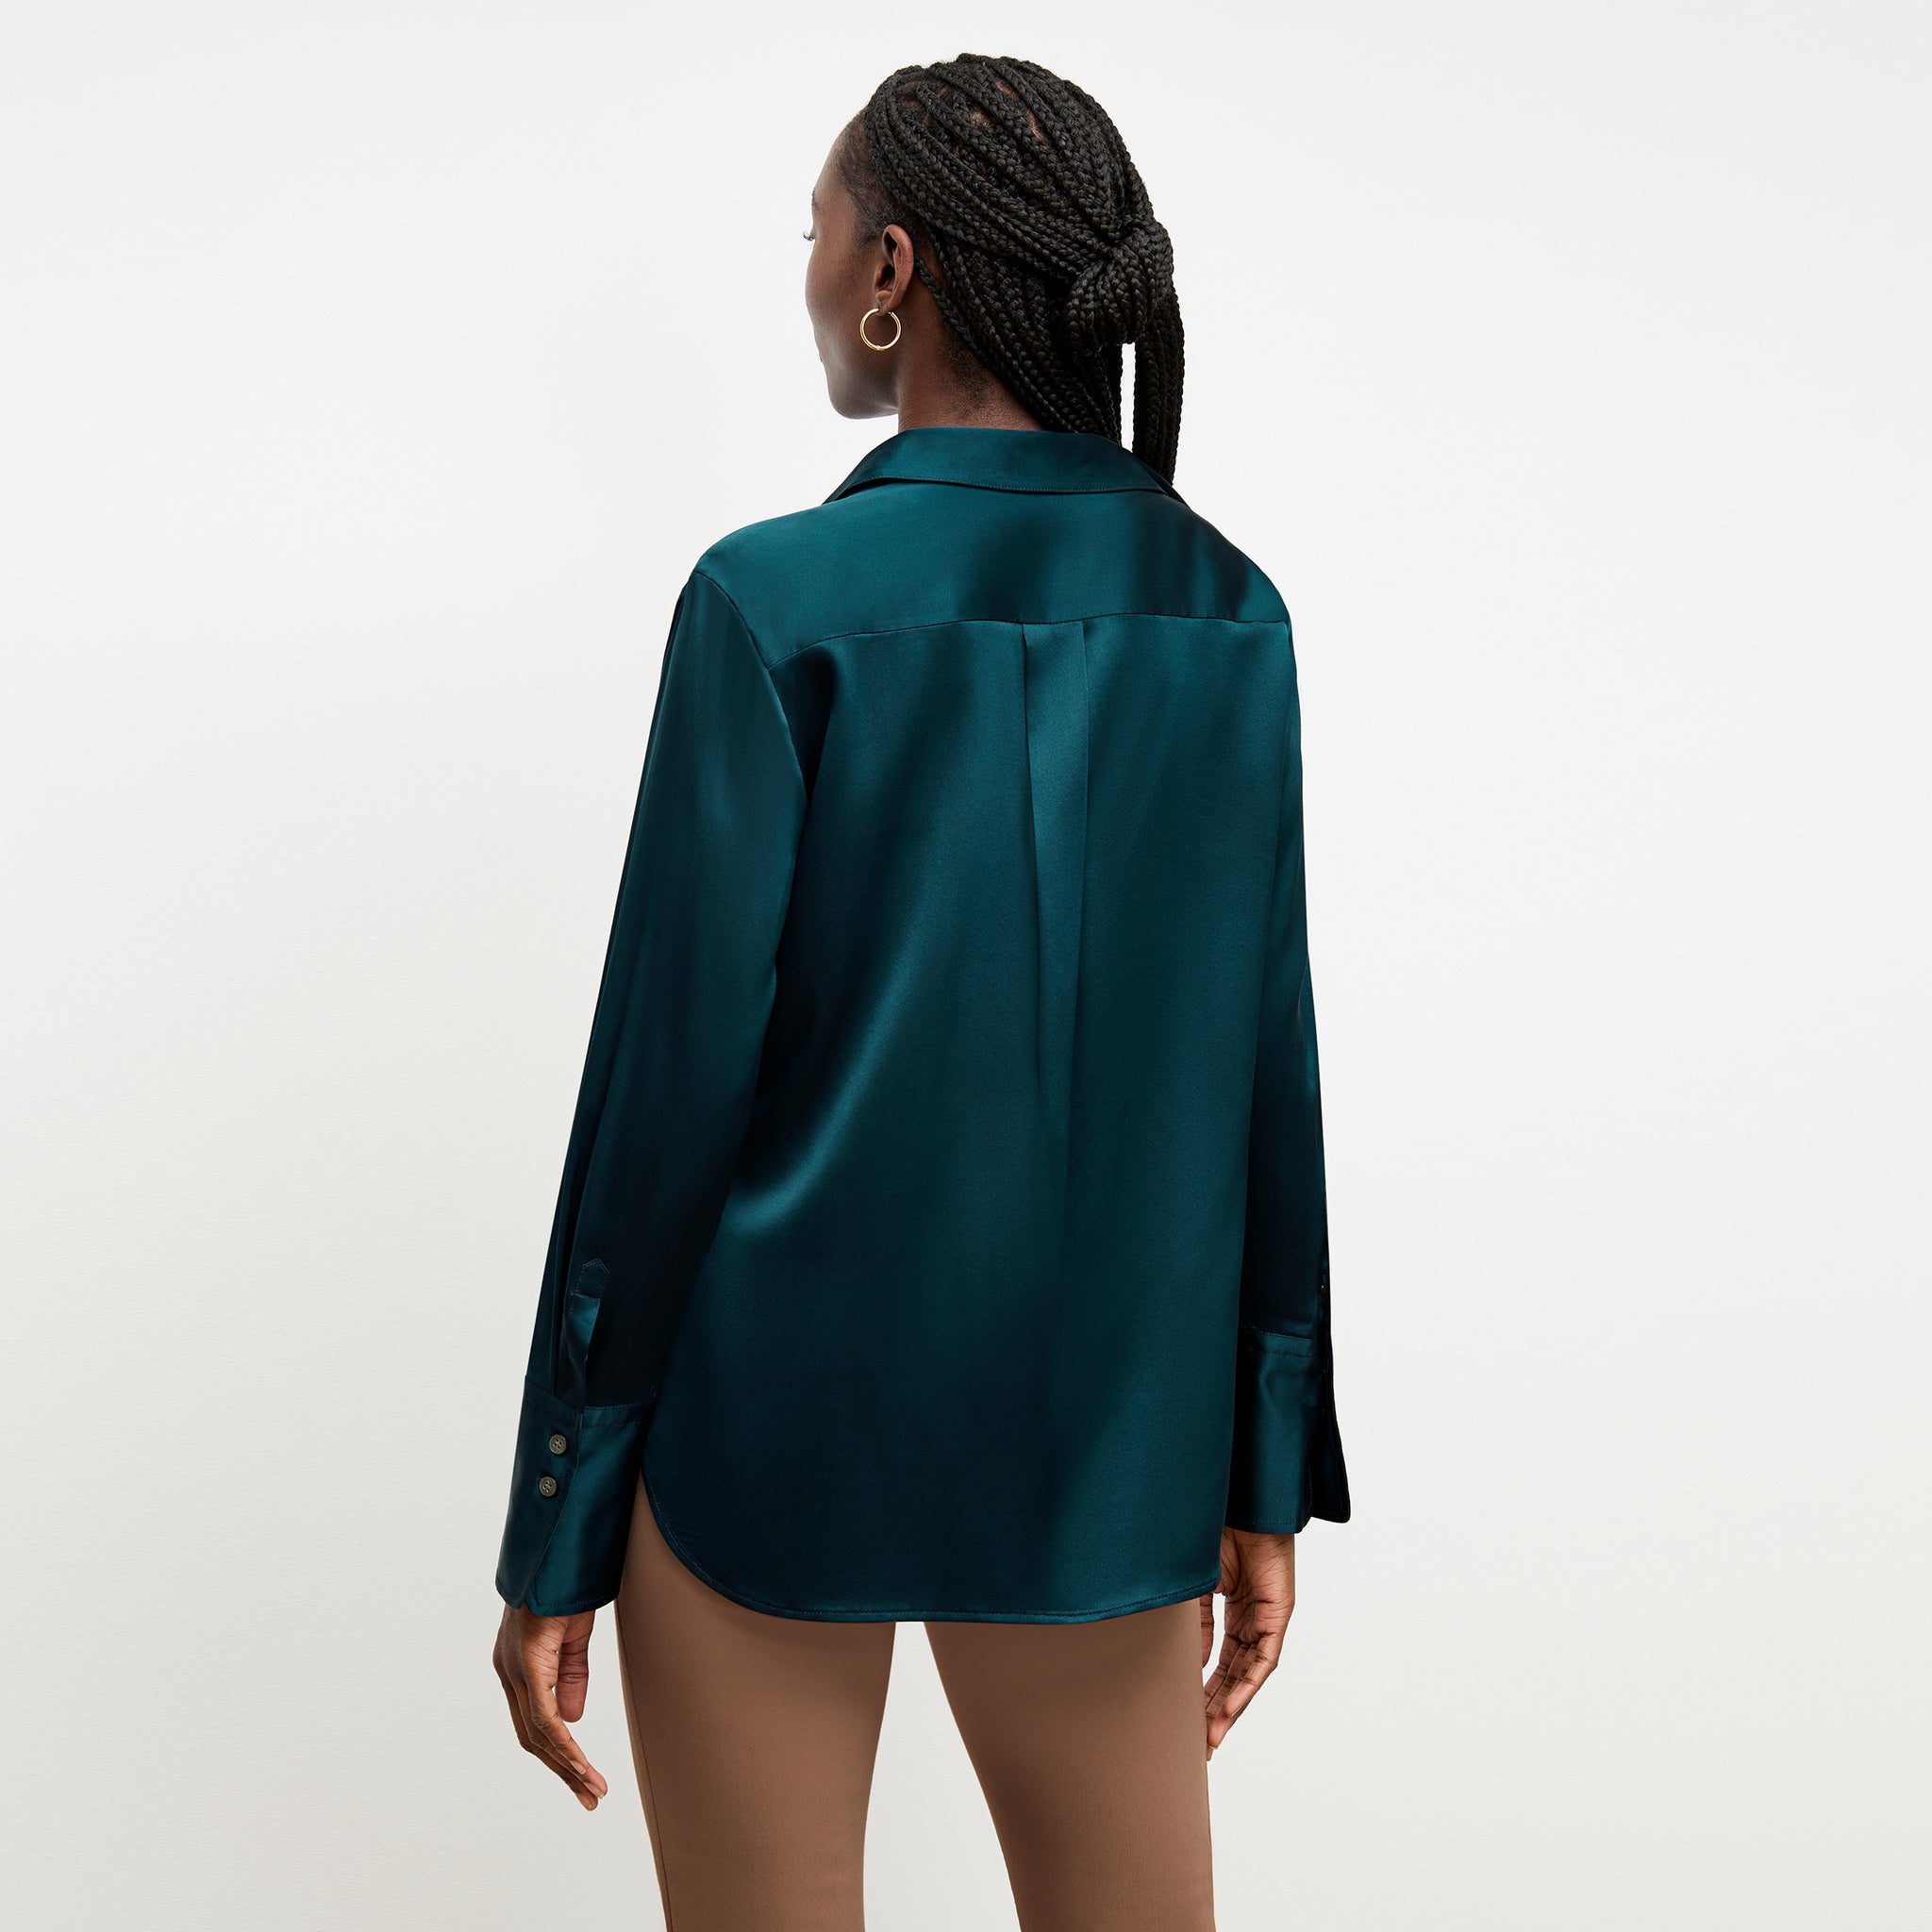 Back image of a woman wearing the tatum top in lagoon